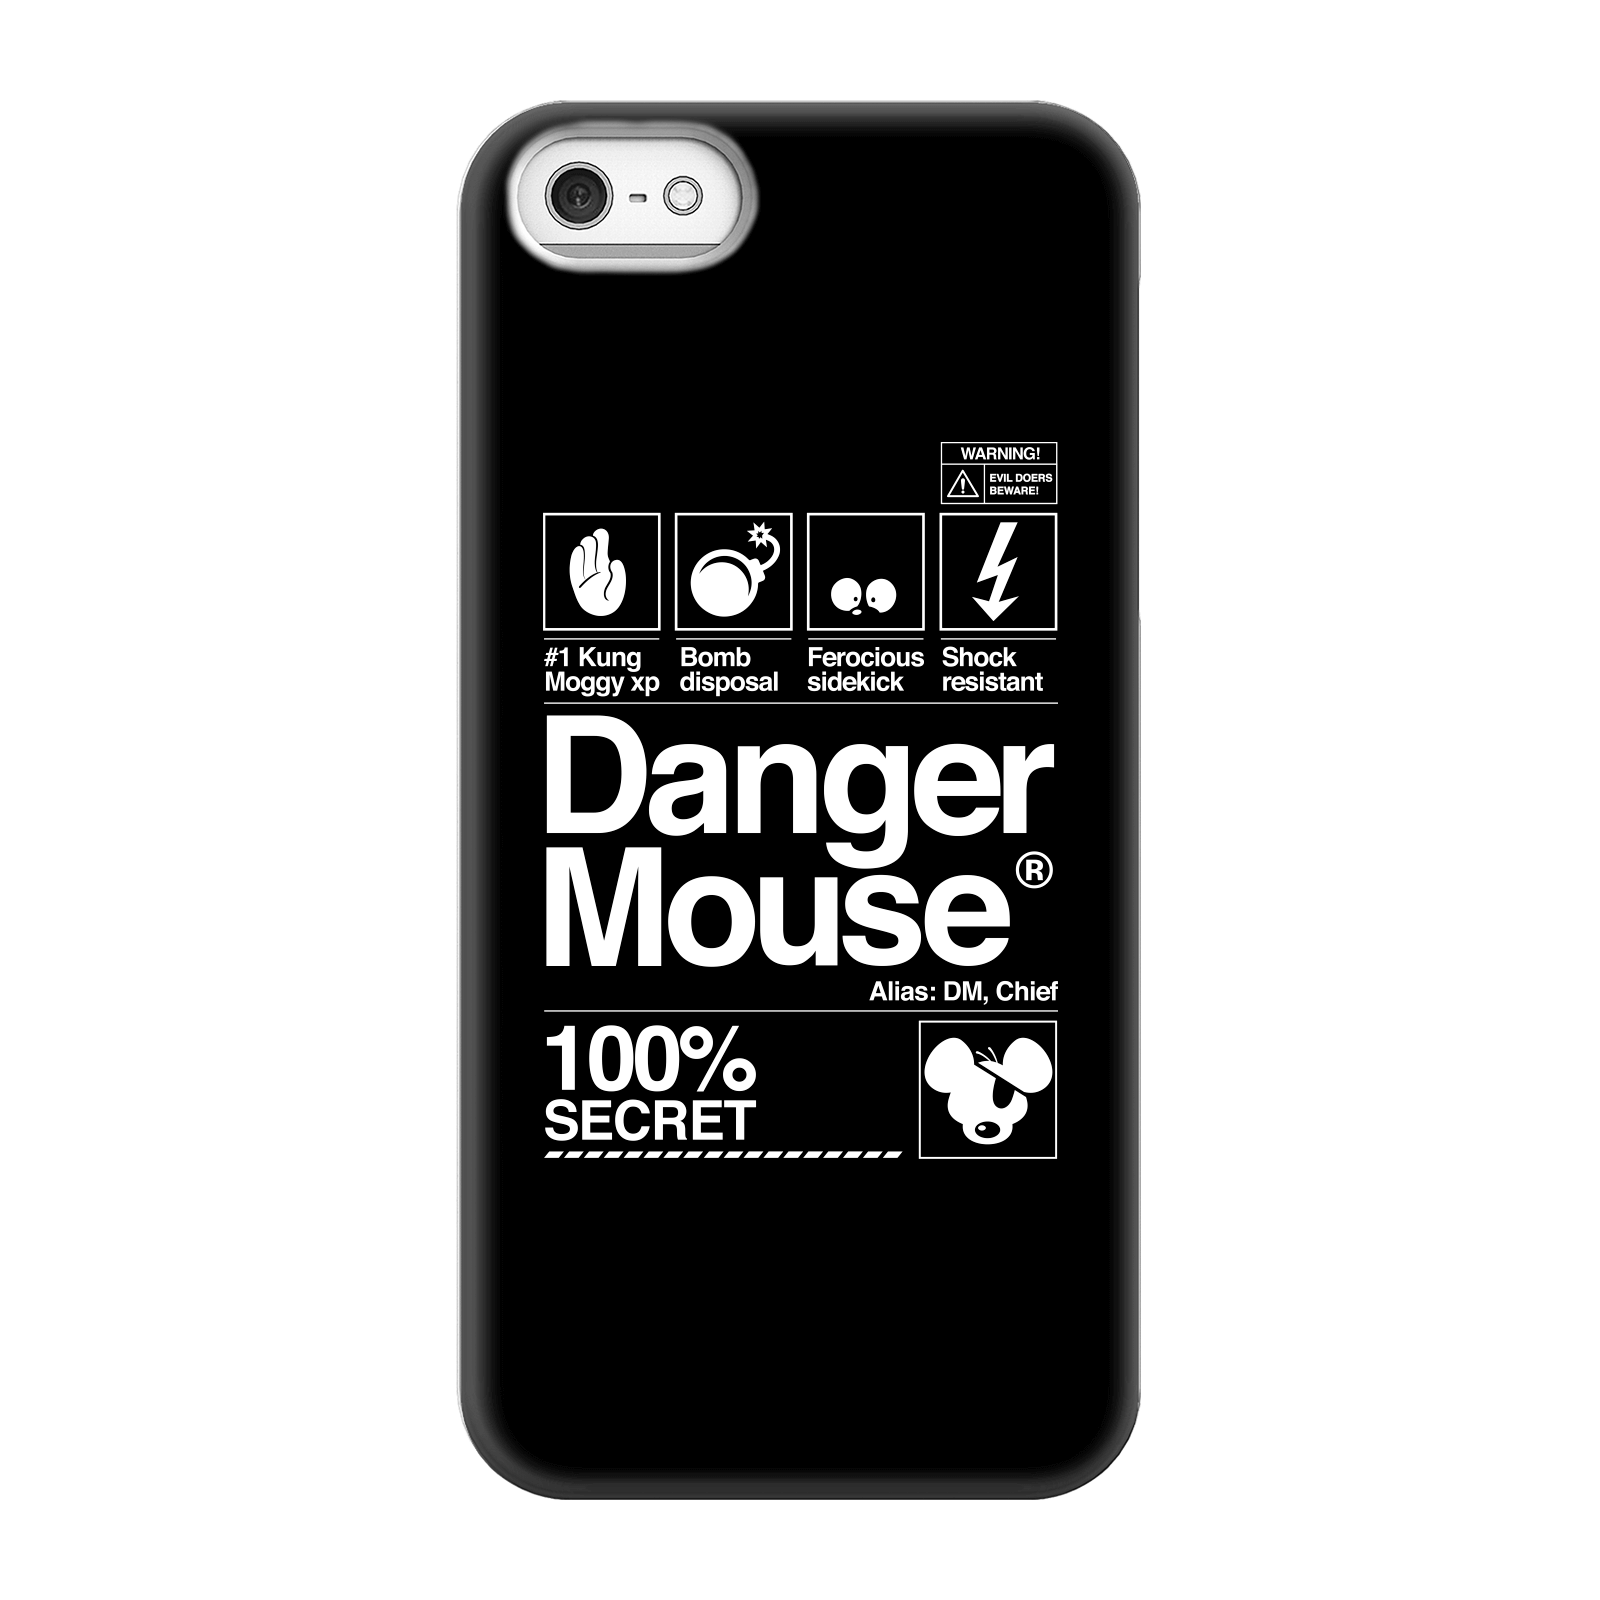 Danger Mouse 100% Secret Phone Case for iPhone and Android - iPhone 5/5s - Snap Case - Gloss